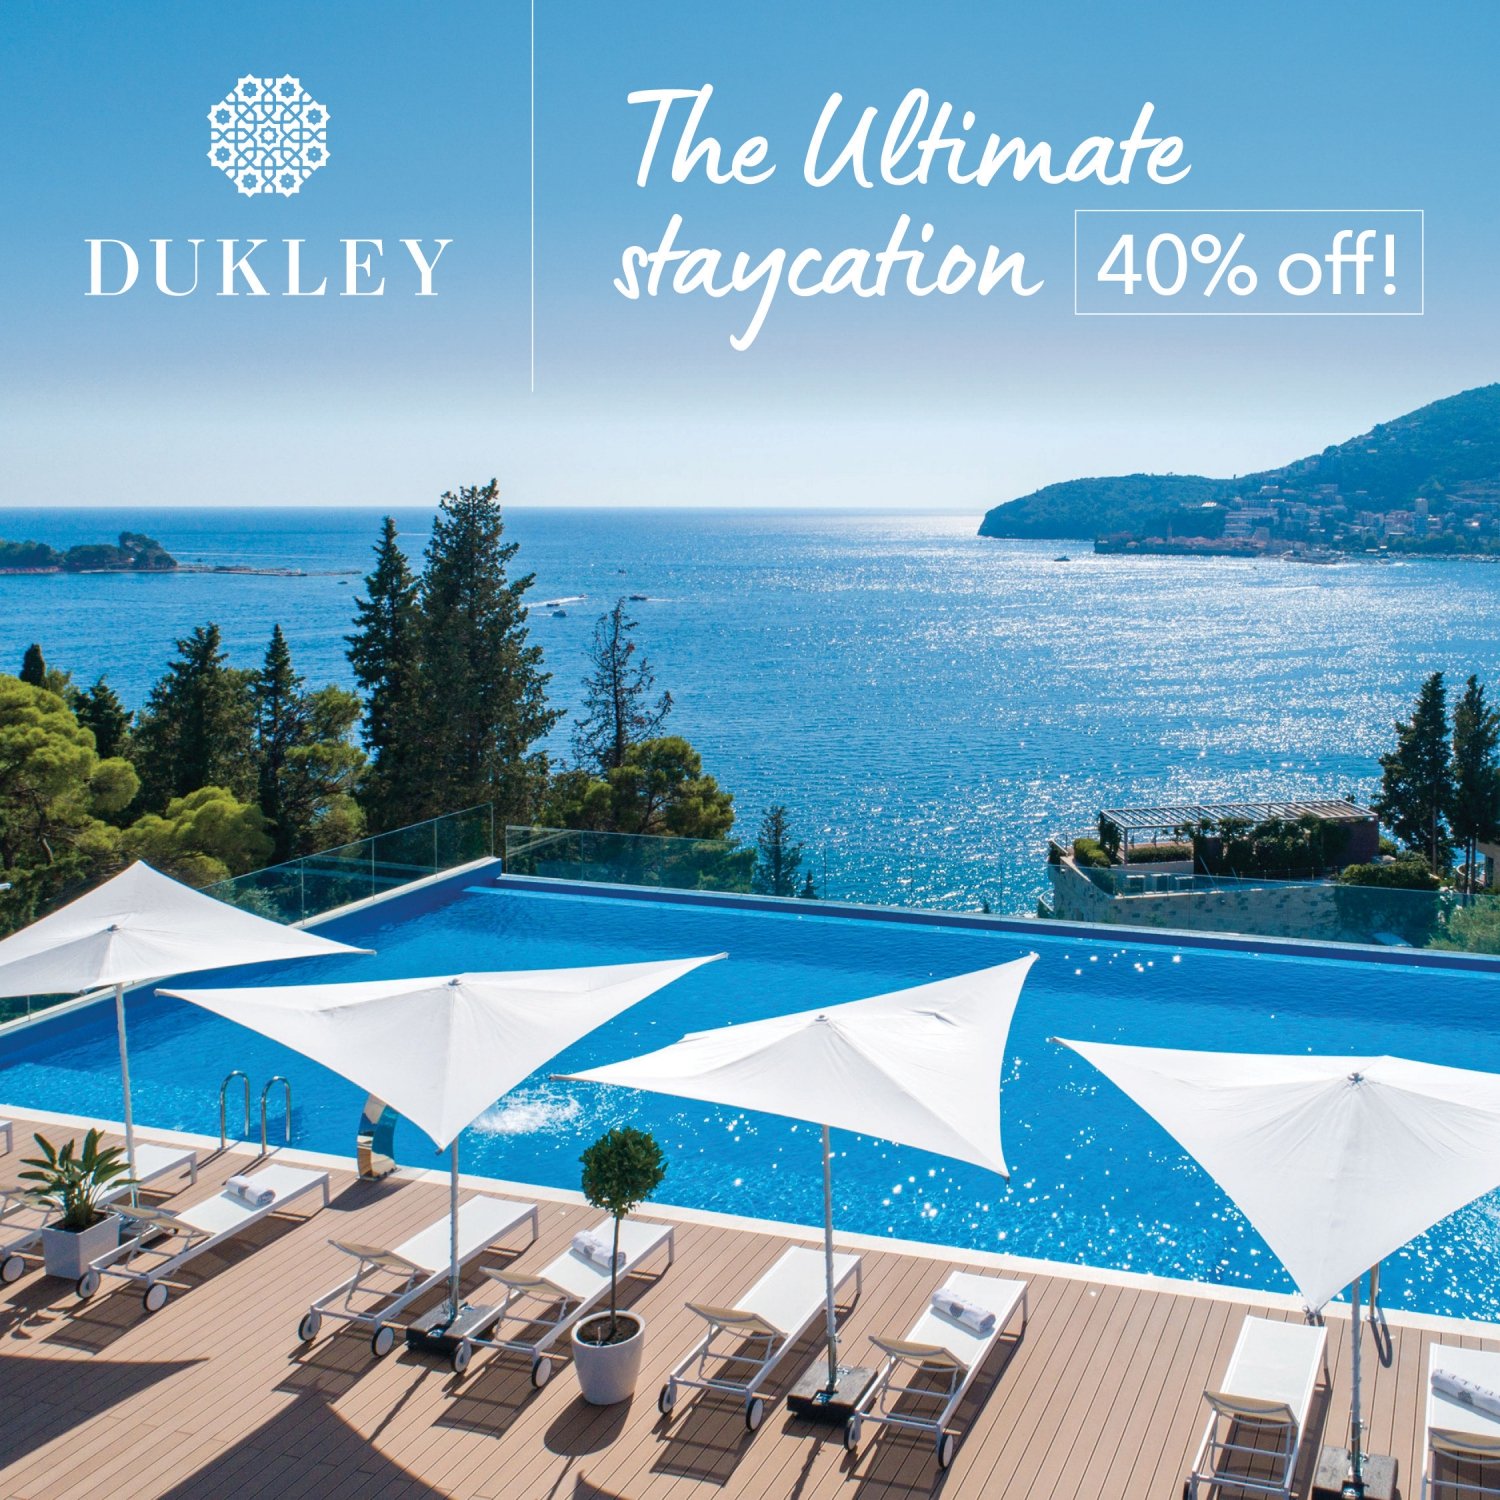 The Ultimate Staycation by Dukley Hotel & Resort